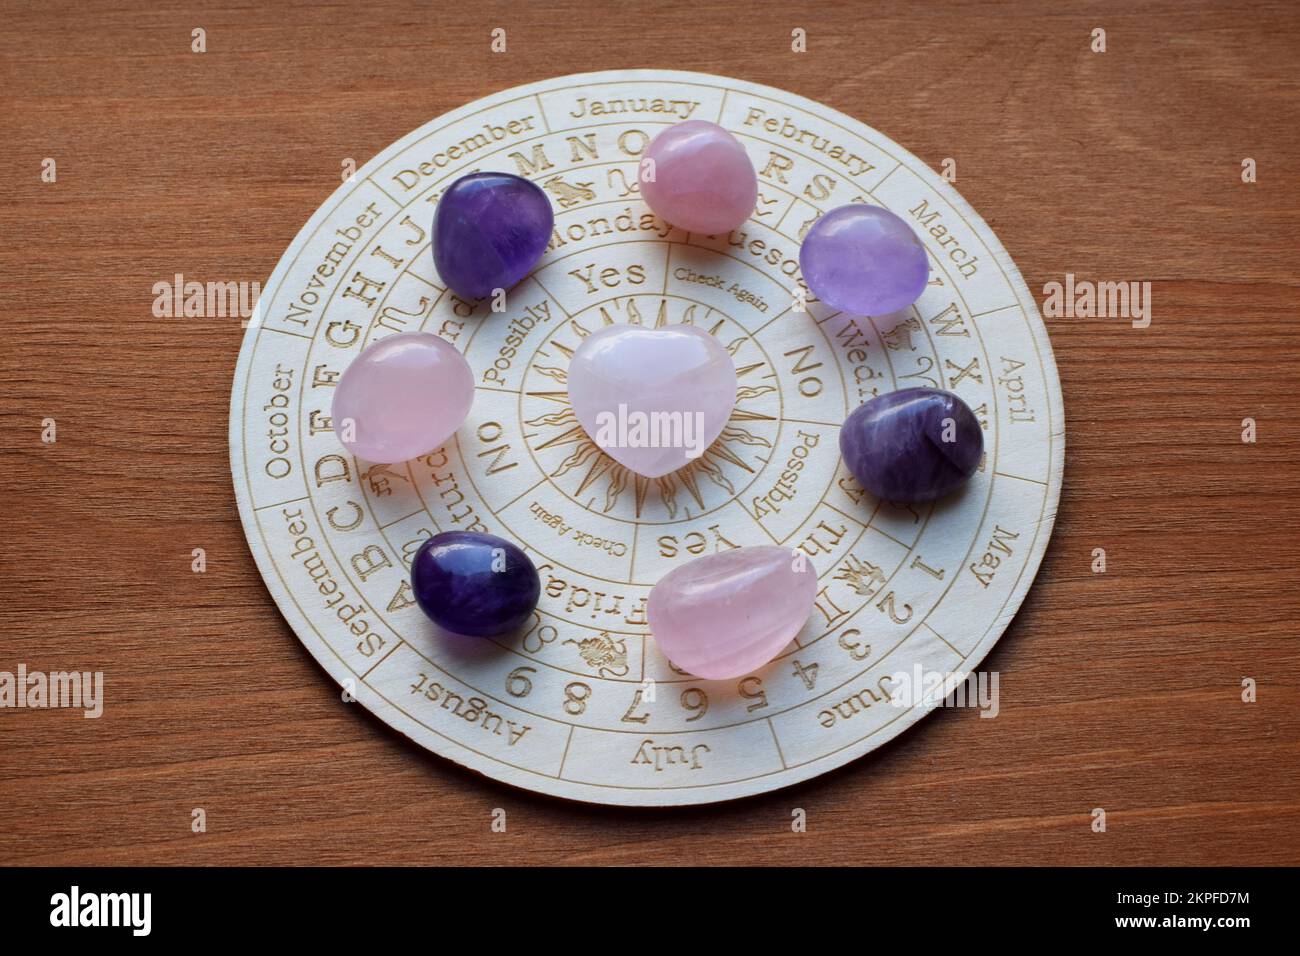 Gemstones for zodiac signs, amethysts and rose quartz on the zodiac chart. Predictions, witchcraft, spiritual esoteric practice. Stock Photo